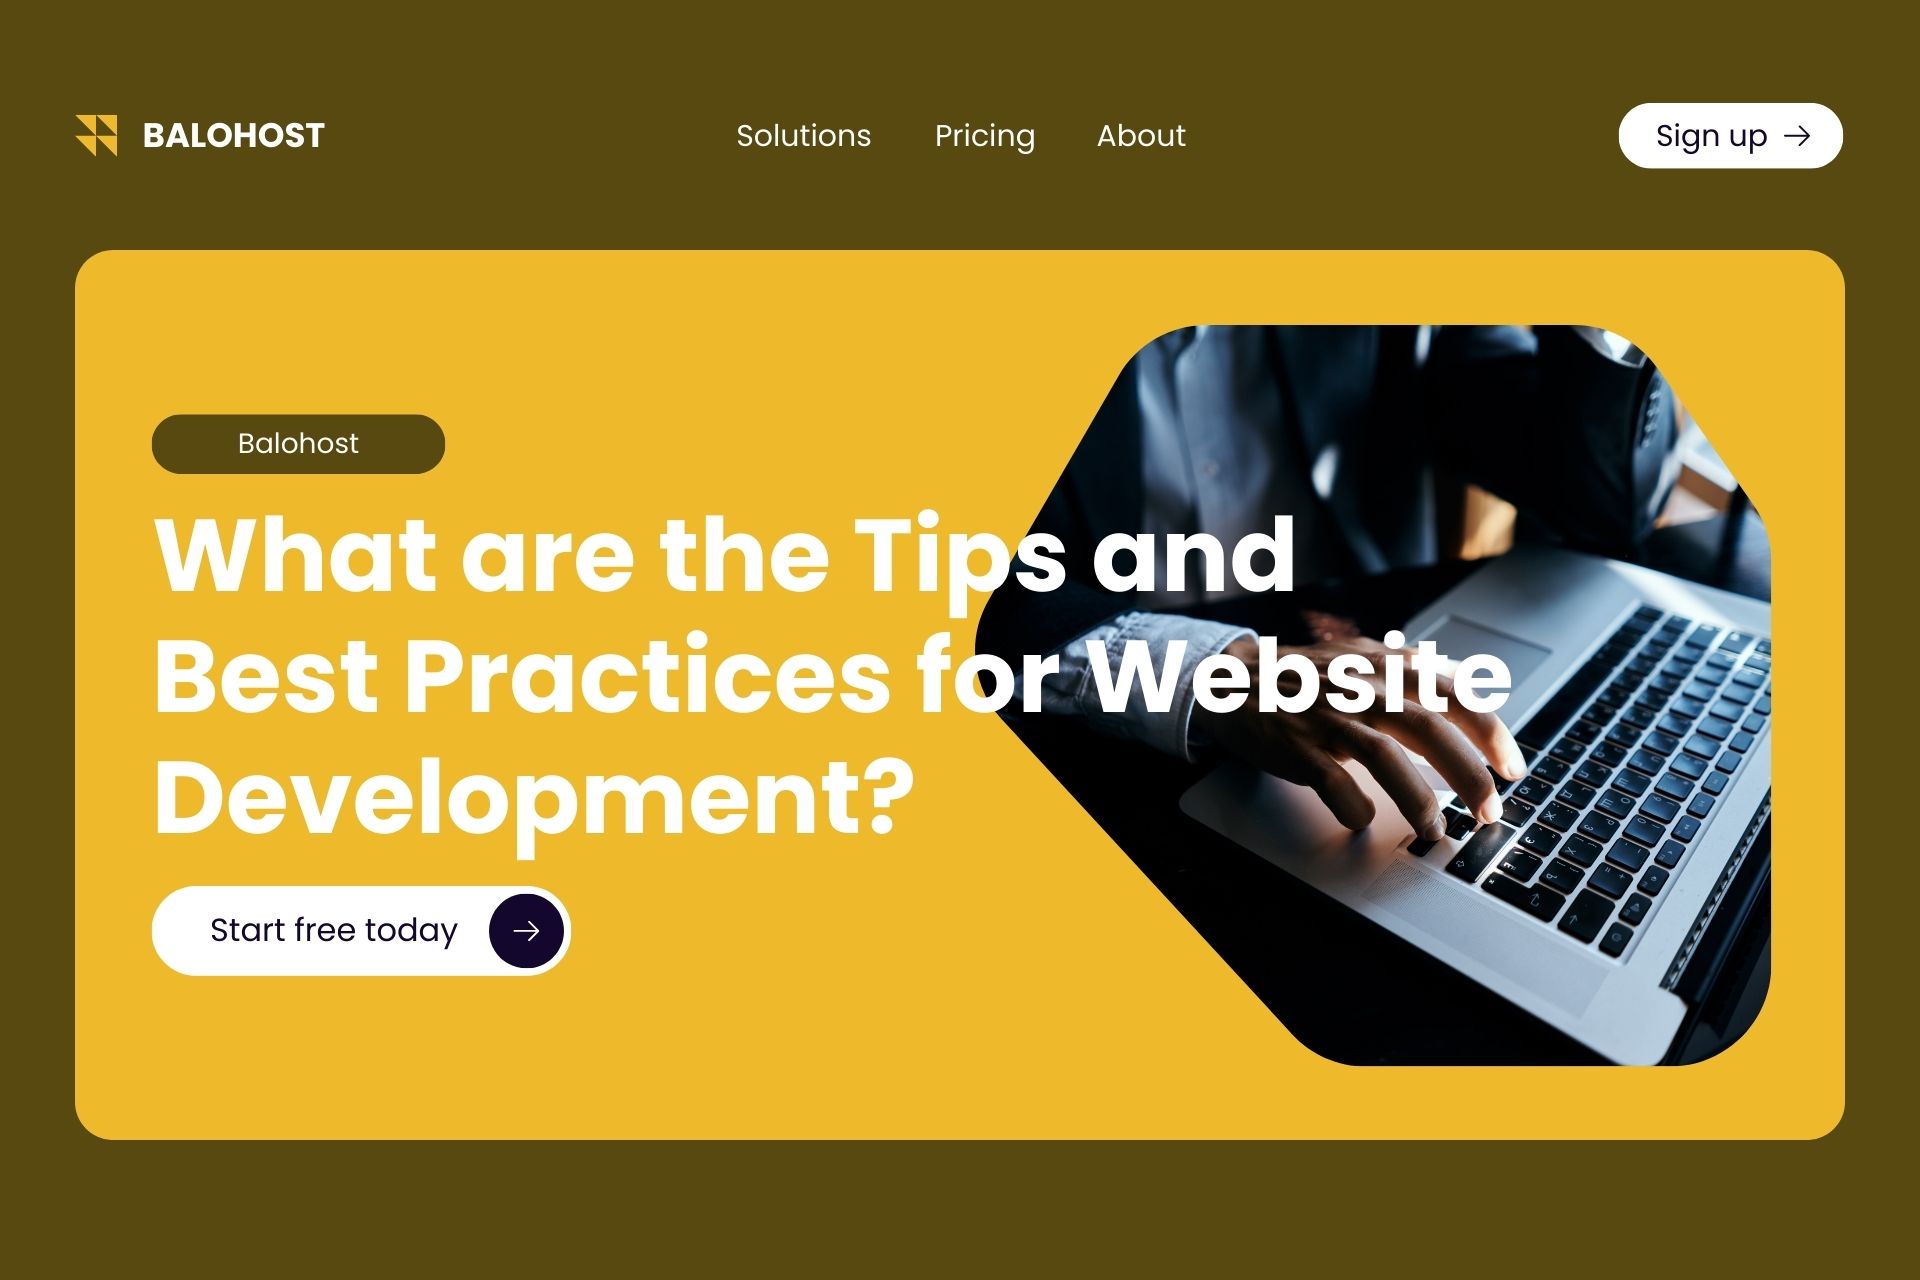 What are the Tips and Best Practices for Website Development?